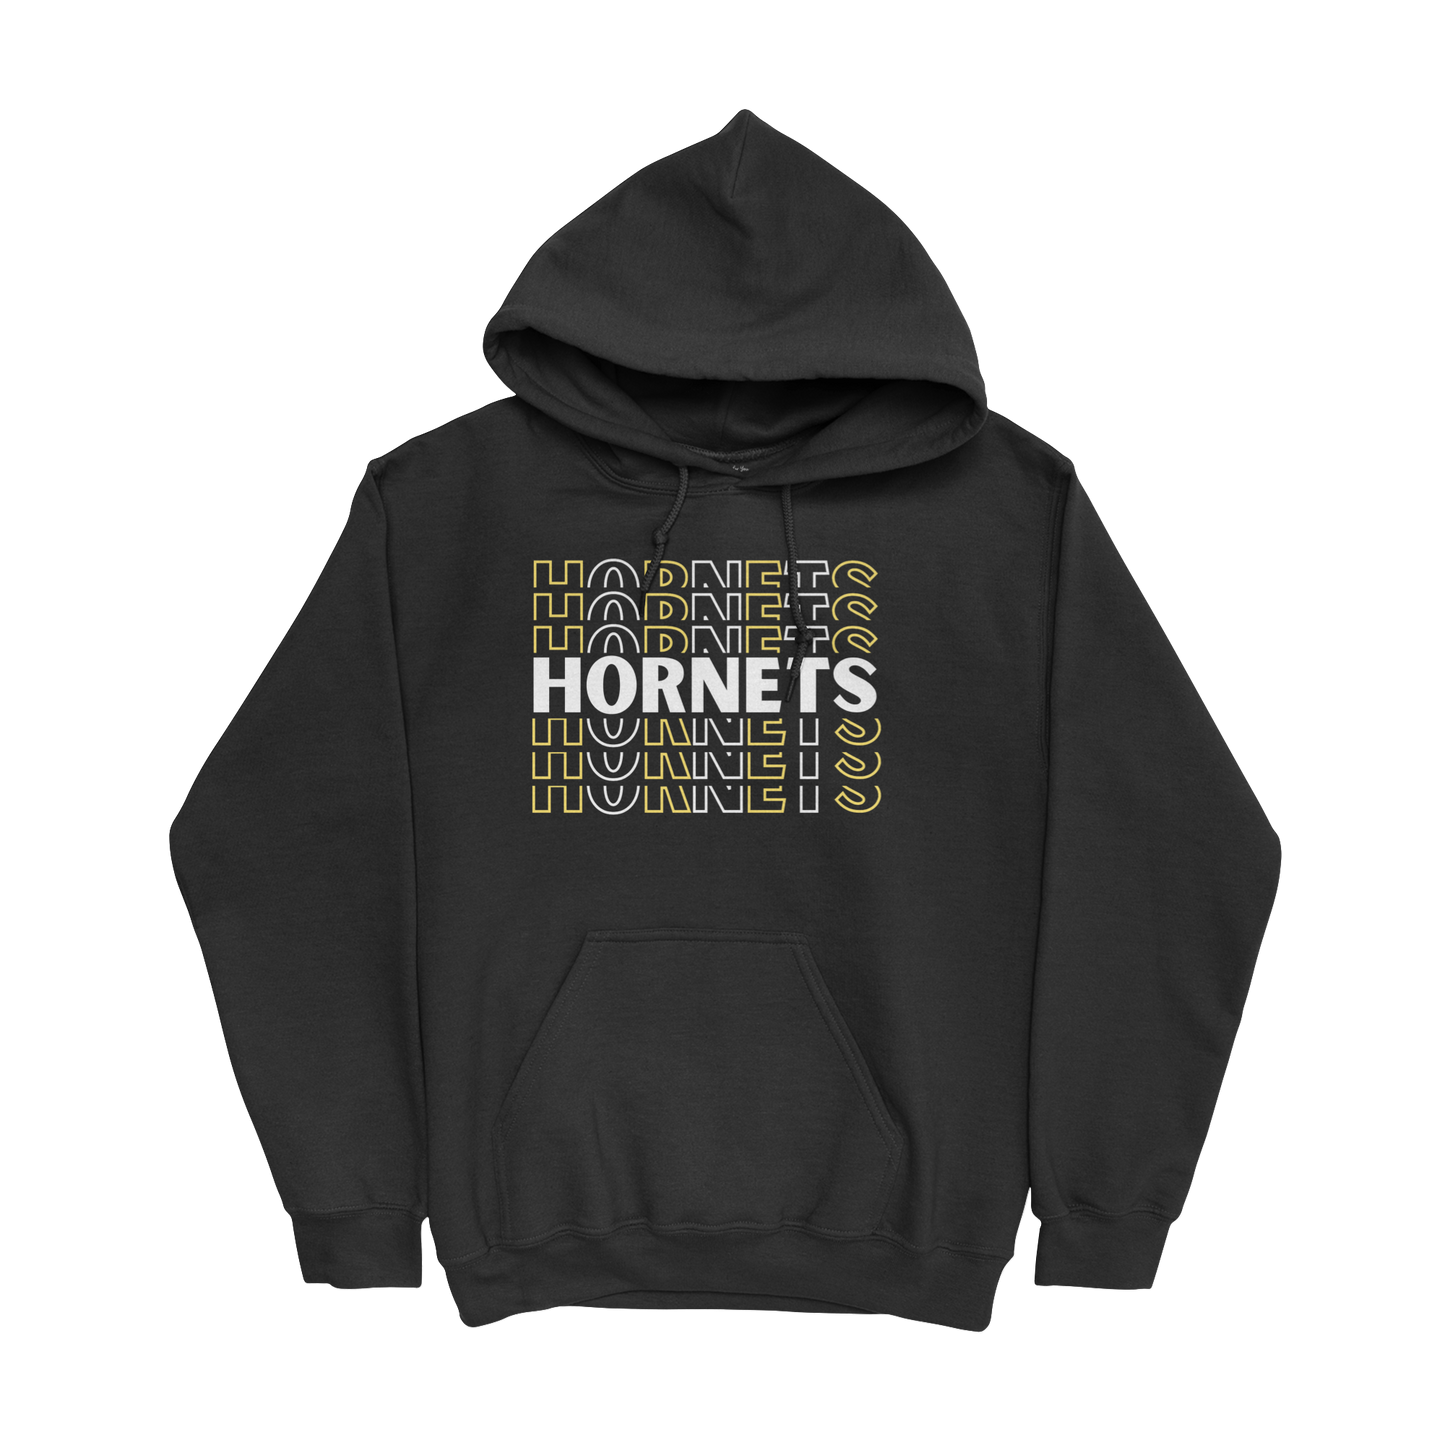 Repeating Hornets Youth Hoodie